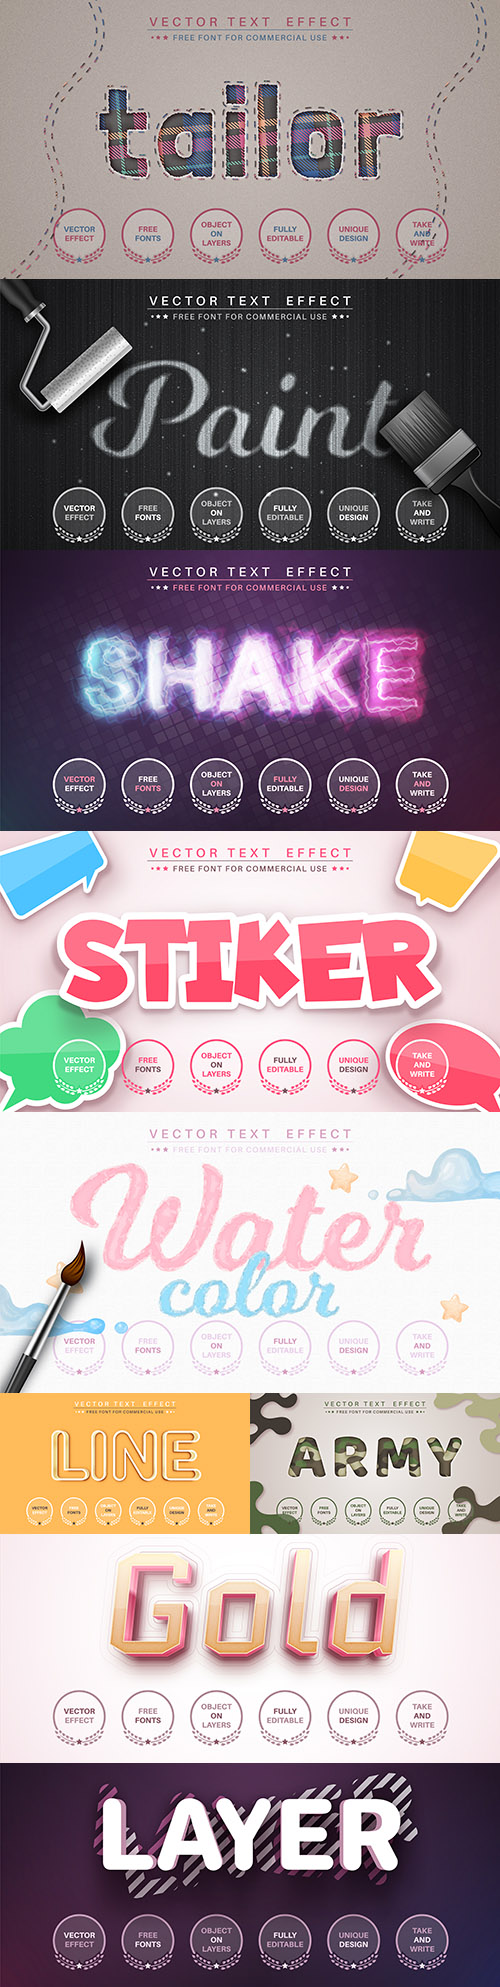 Editable font and 3d effect text design collection illustration 64